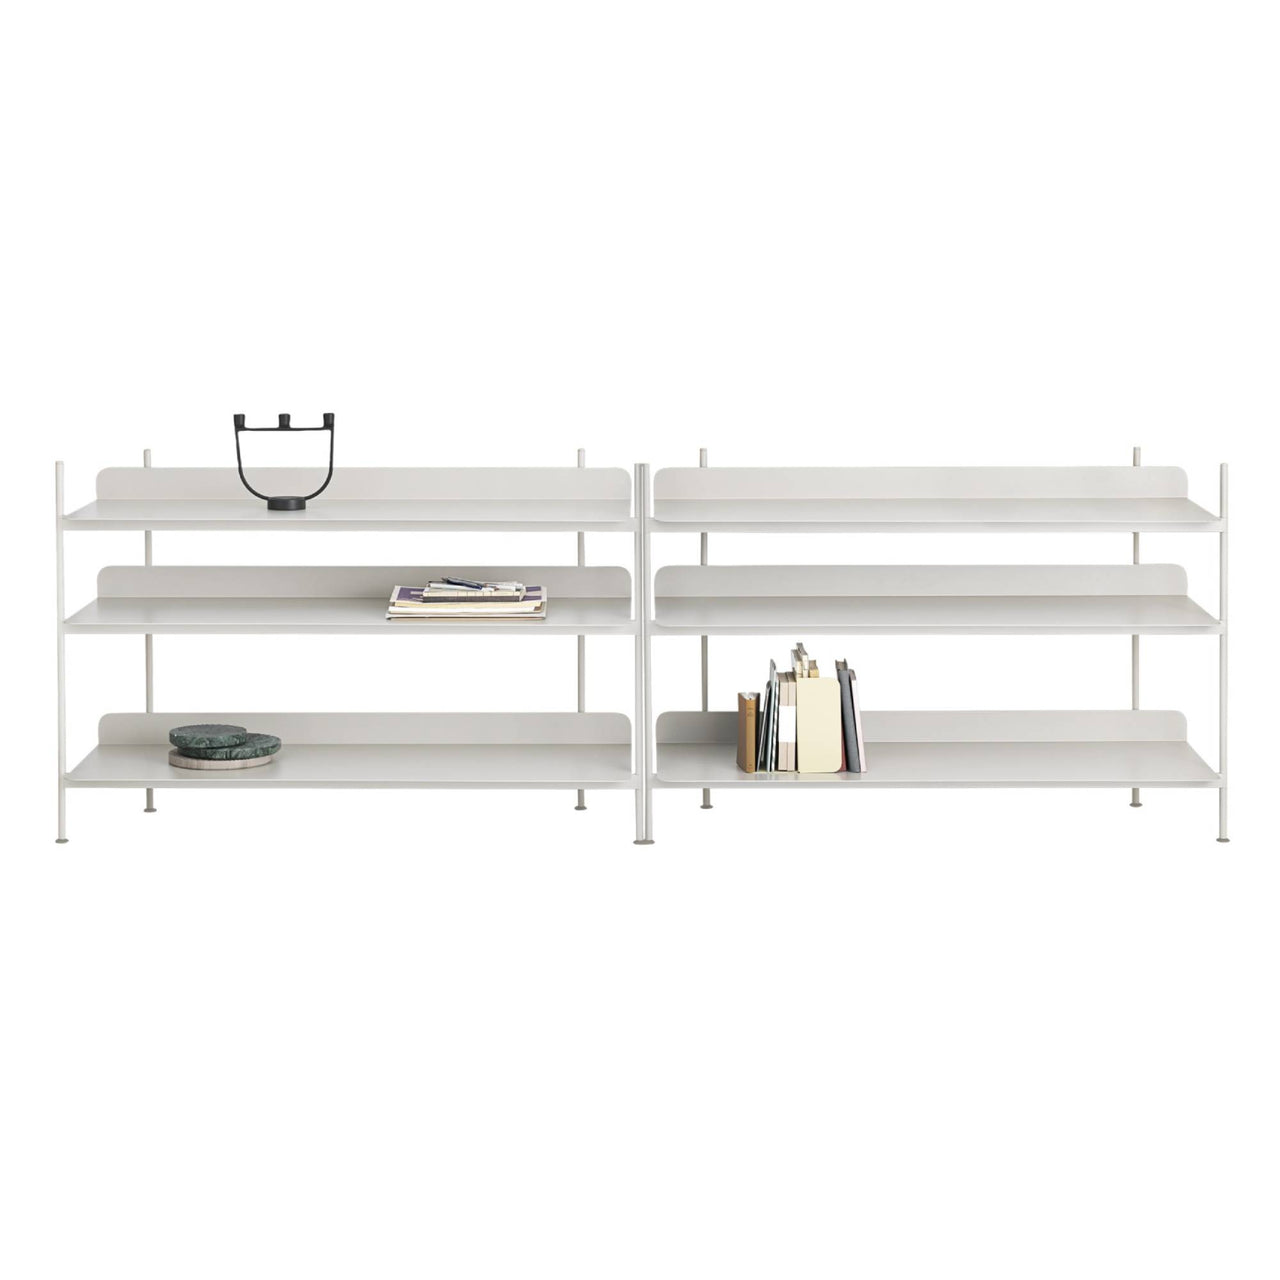 Compile Shelving System: Configuration 6 + Grey